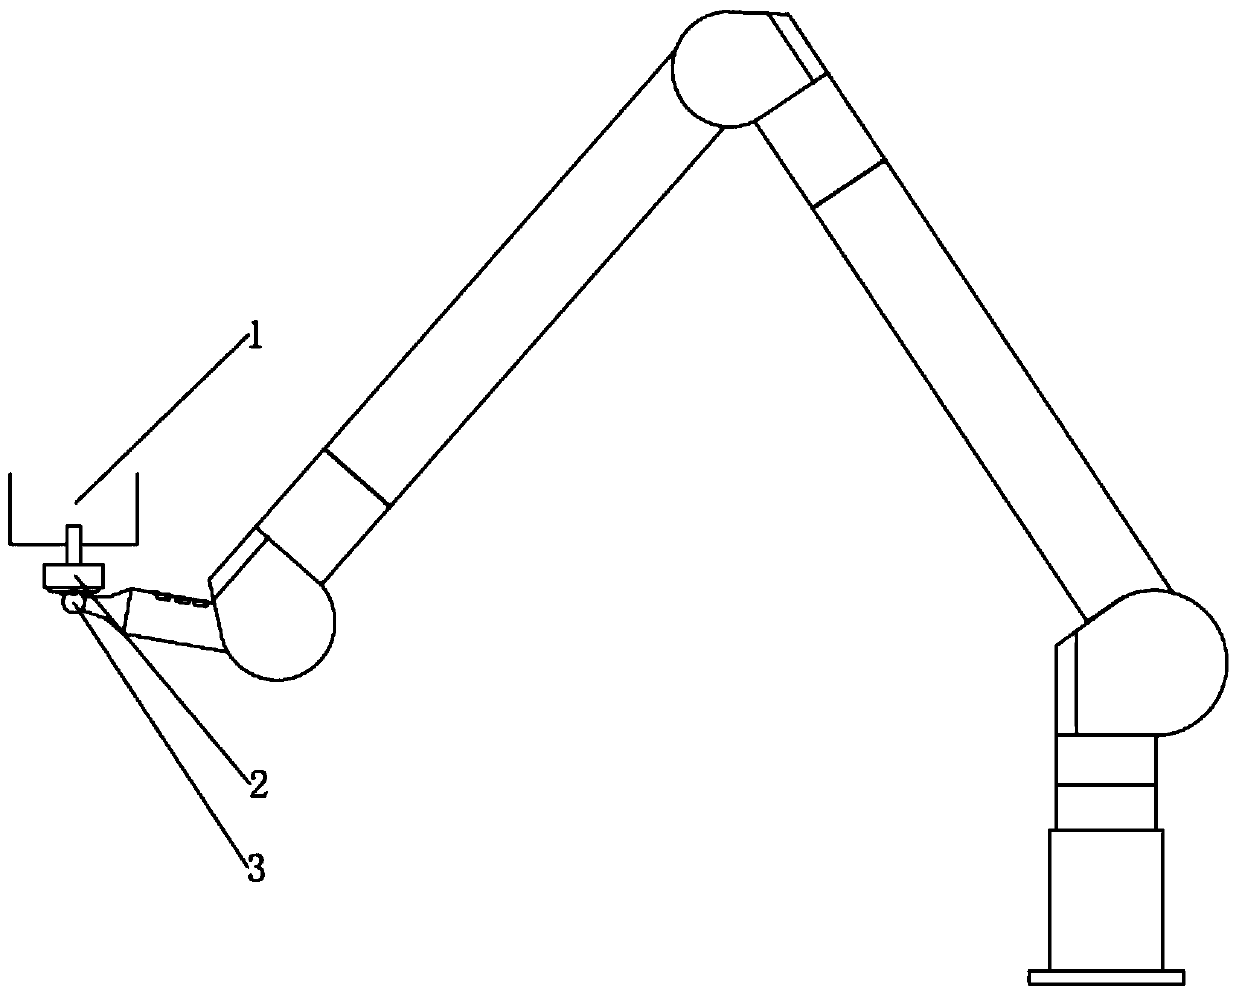 A Calibration Method for Joint Coordinate Measuring Machine Combined with CNC Machine Tool